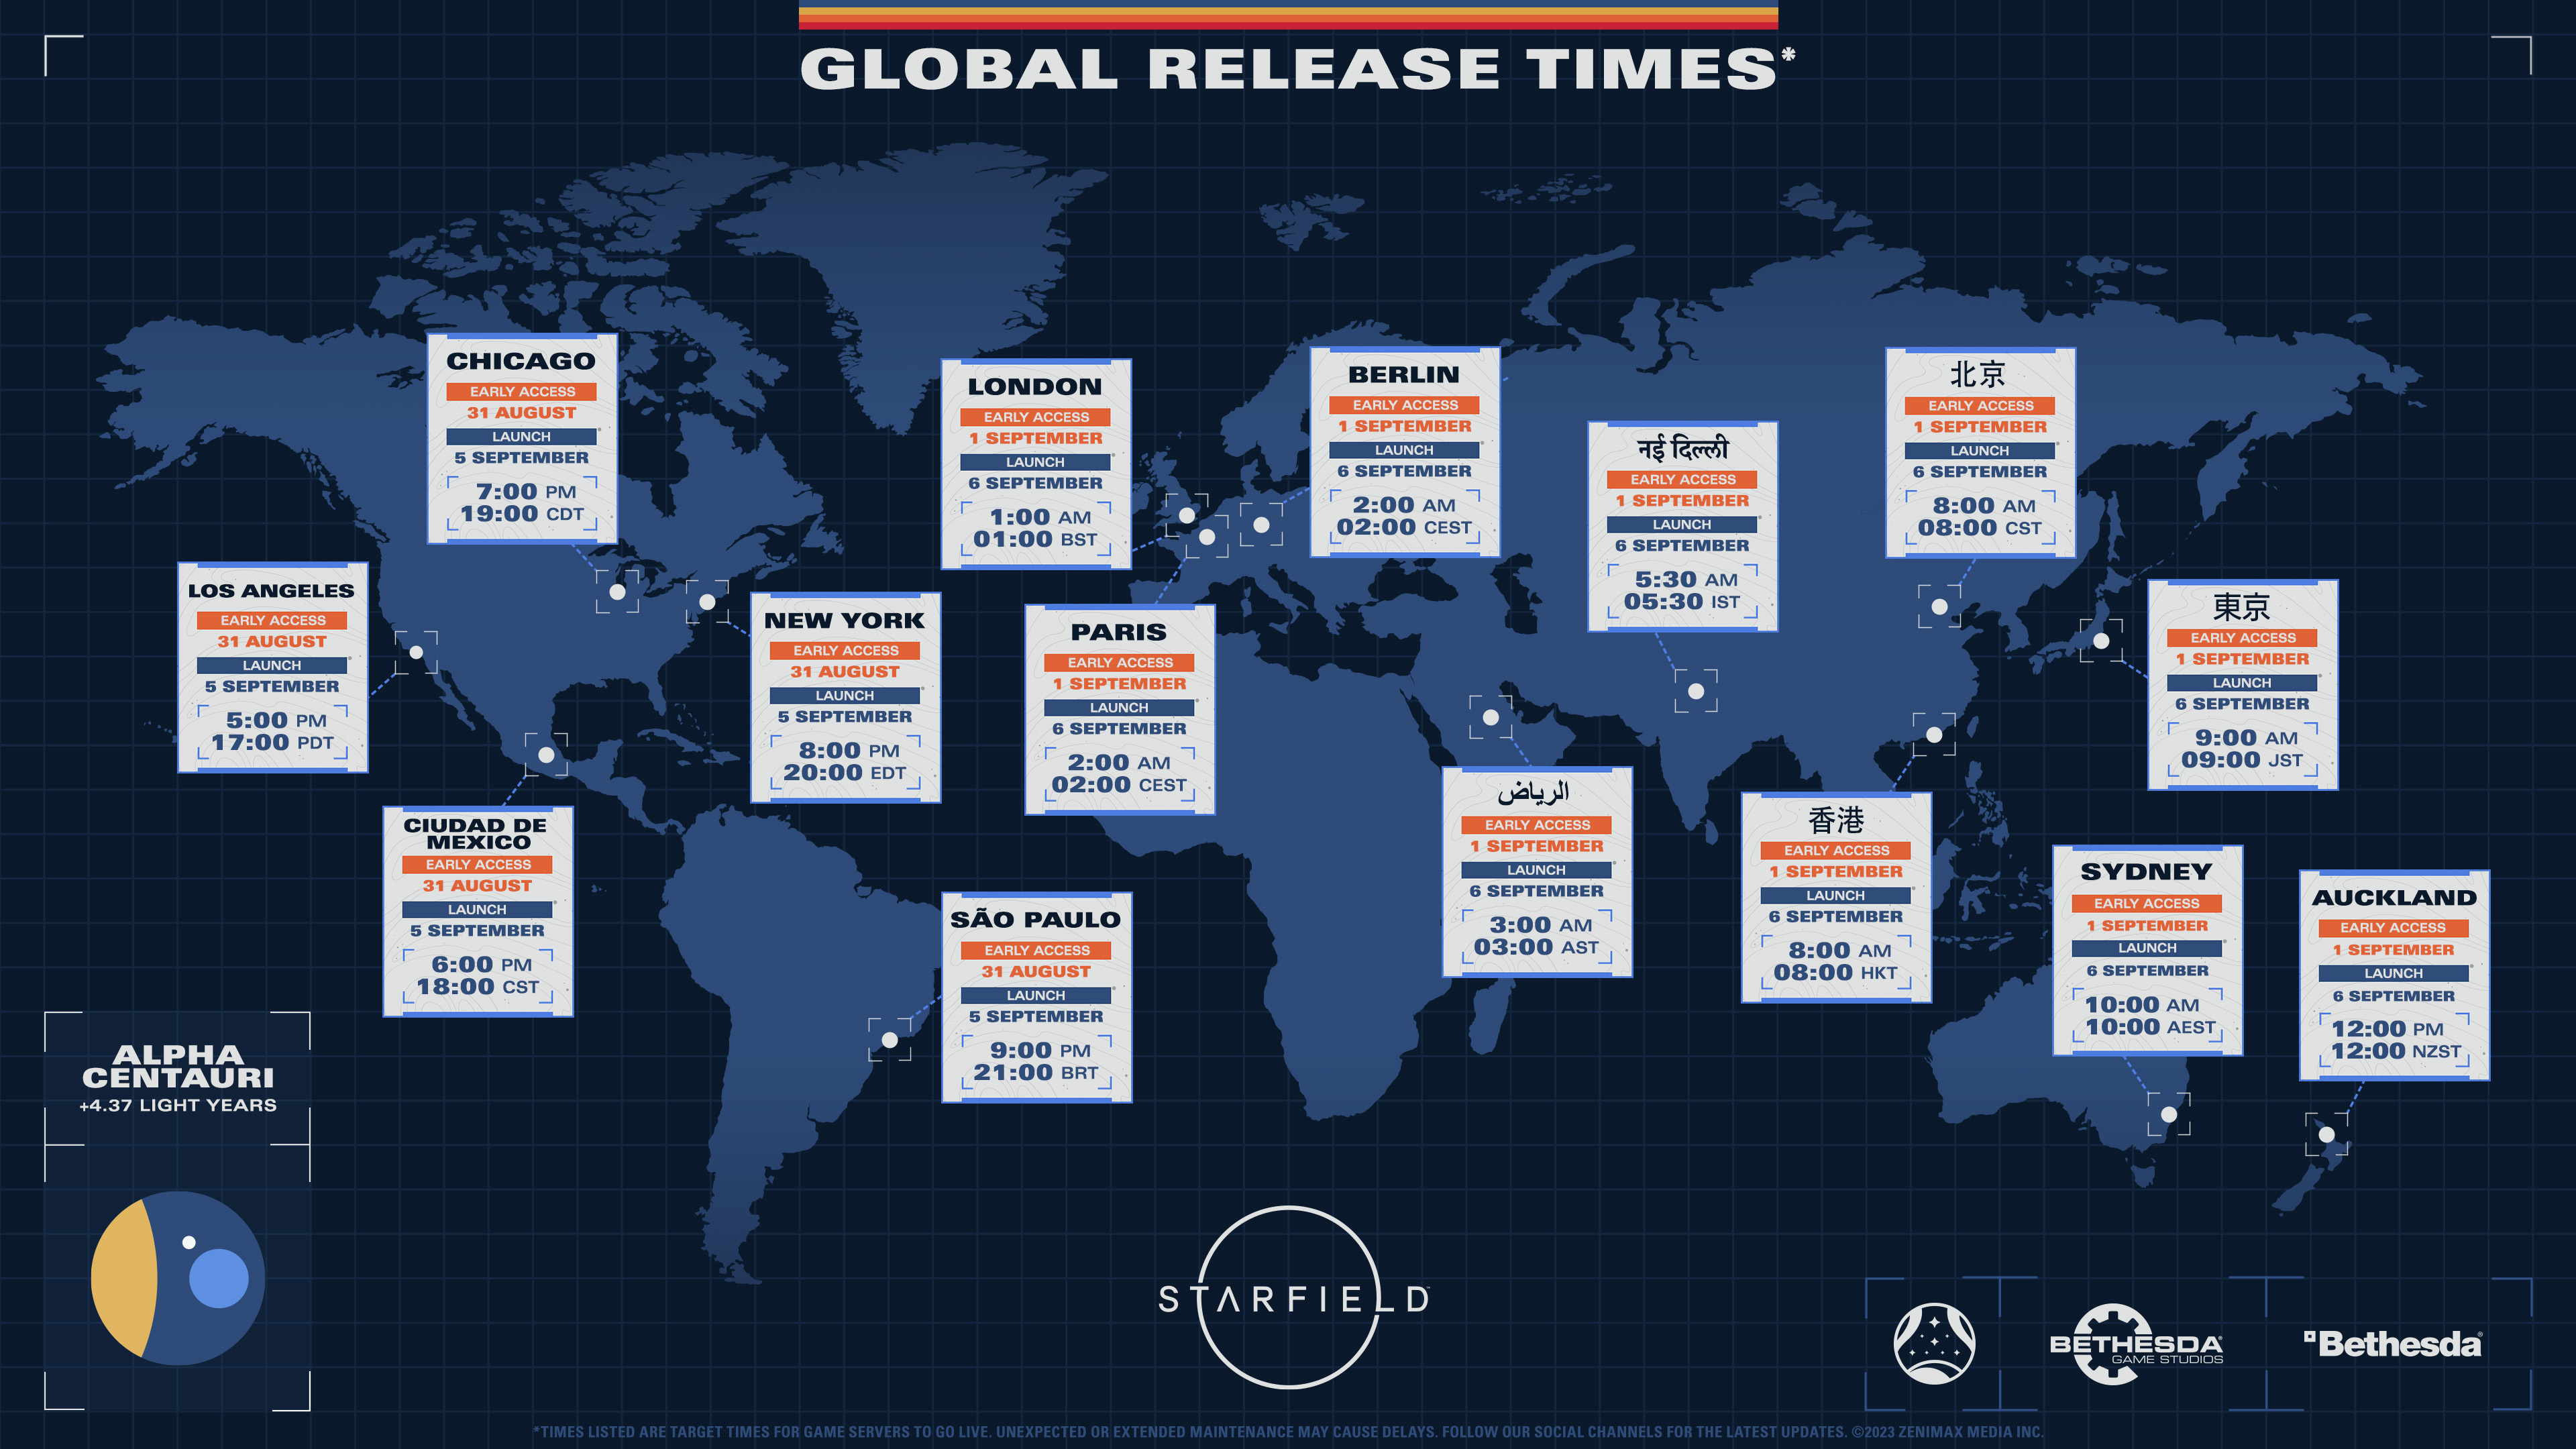 Here's The Starfield Global Release Times: Prepare Your Bodies!